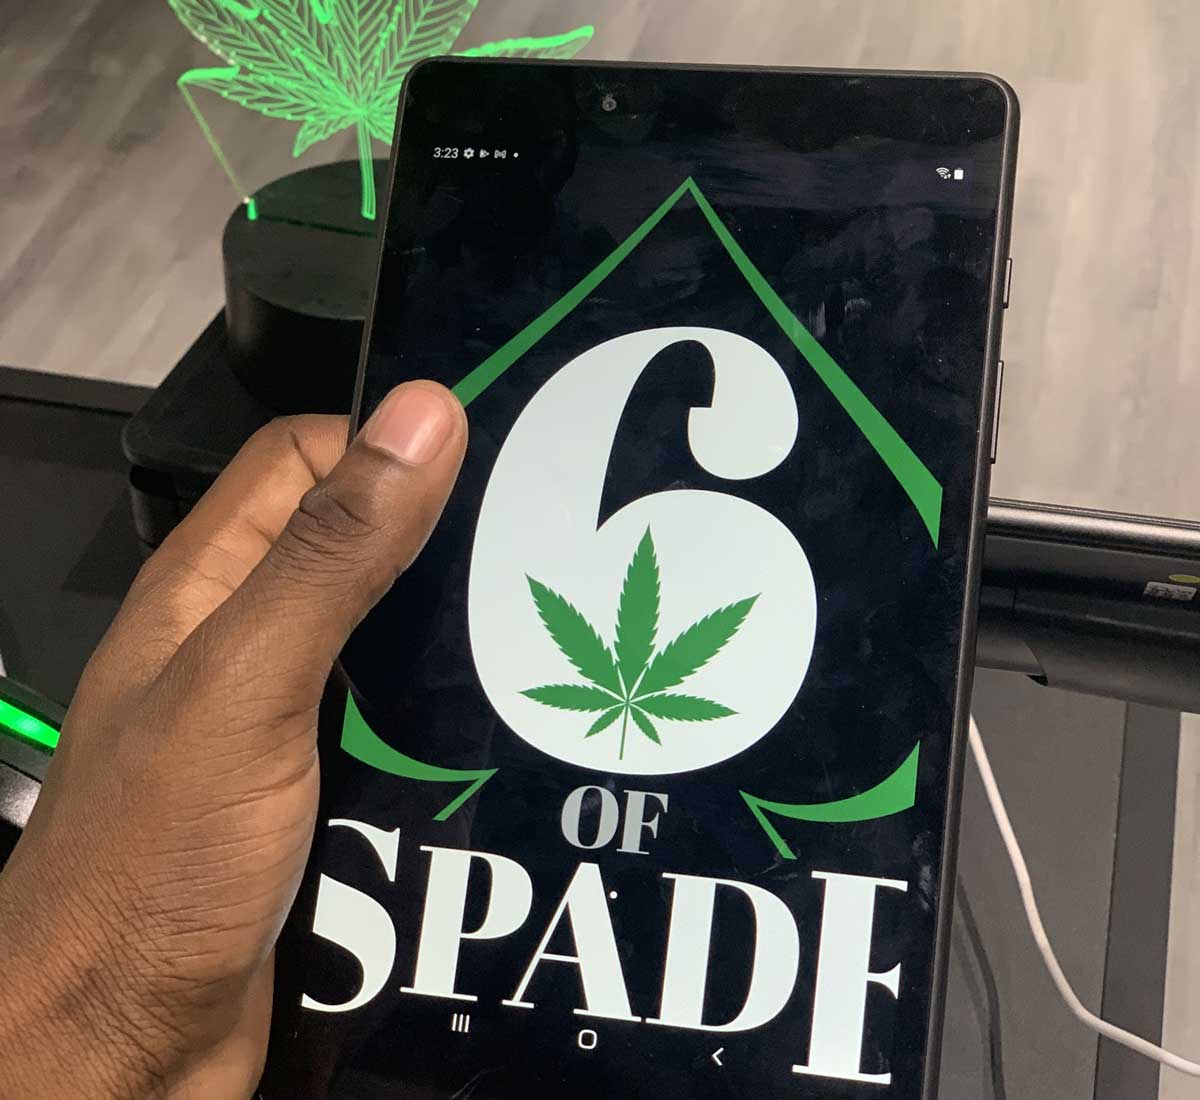 Cannabis Store 6 of Spade - Toronto - Best Prices In Town!  - 2